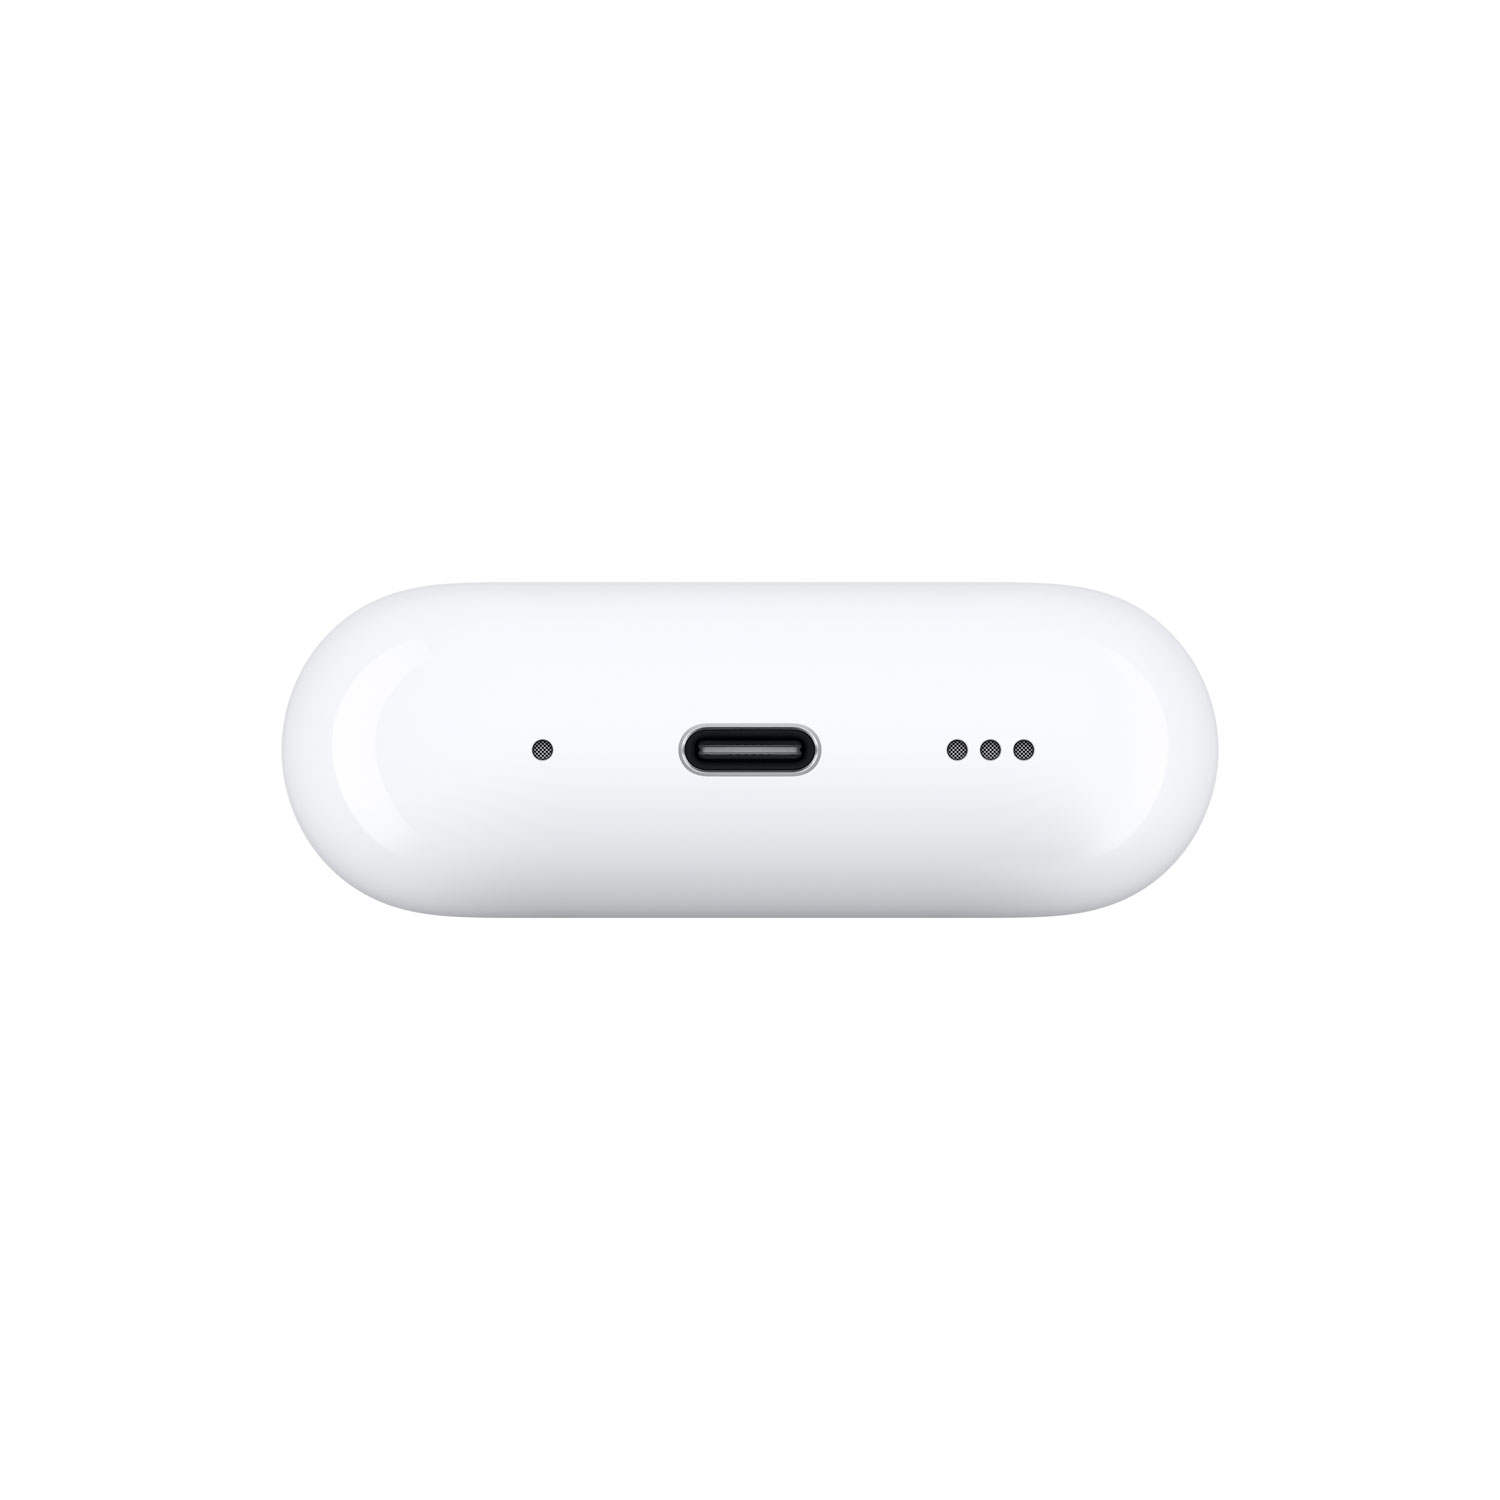 Apple AirPods Pro (2nd generation) Noise Cancelling True Wireless Earbuds  with USB-C MagSafe Charging Case